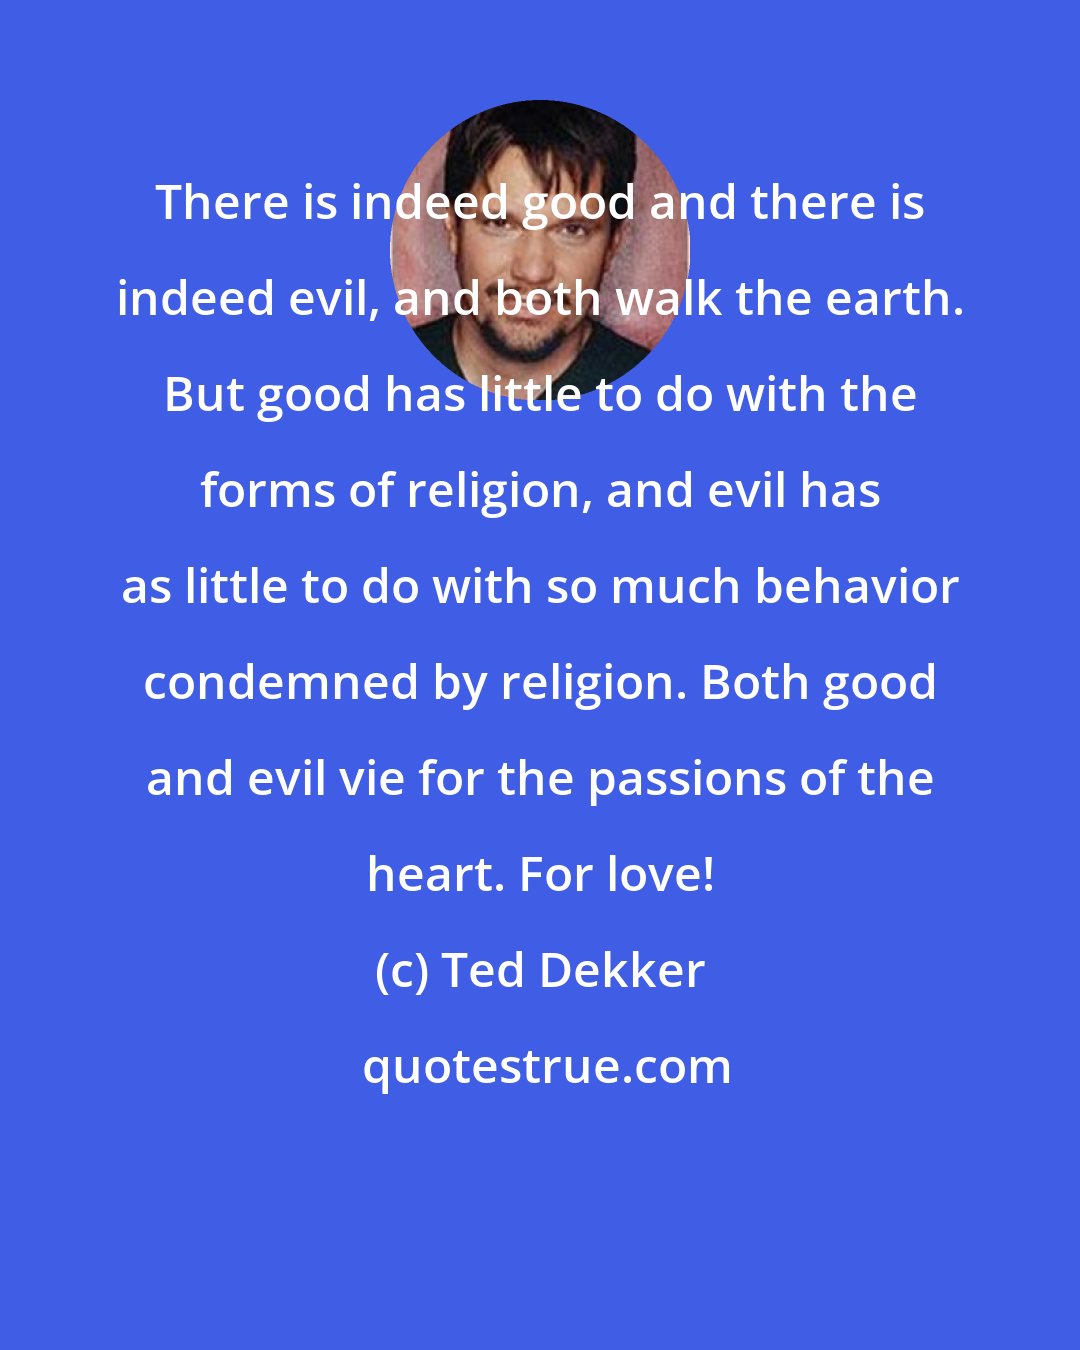 Ted Dekker: There is indeed good and there is indeed evil, and both walk the earth. But good has little to do with the forms of religion, and evil has as little to do with so much behavior condemned by religion. Both good and evil vie for the passions of the heart. For love!